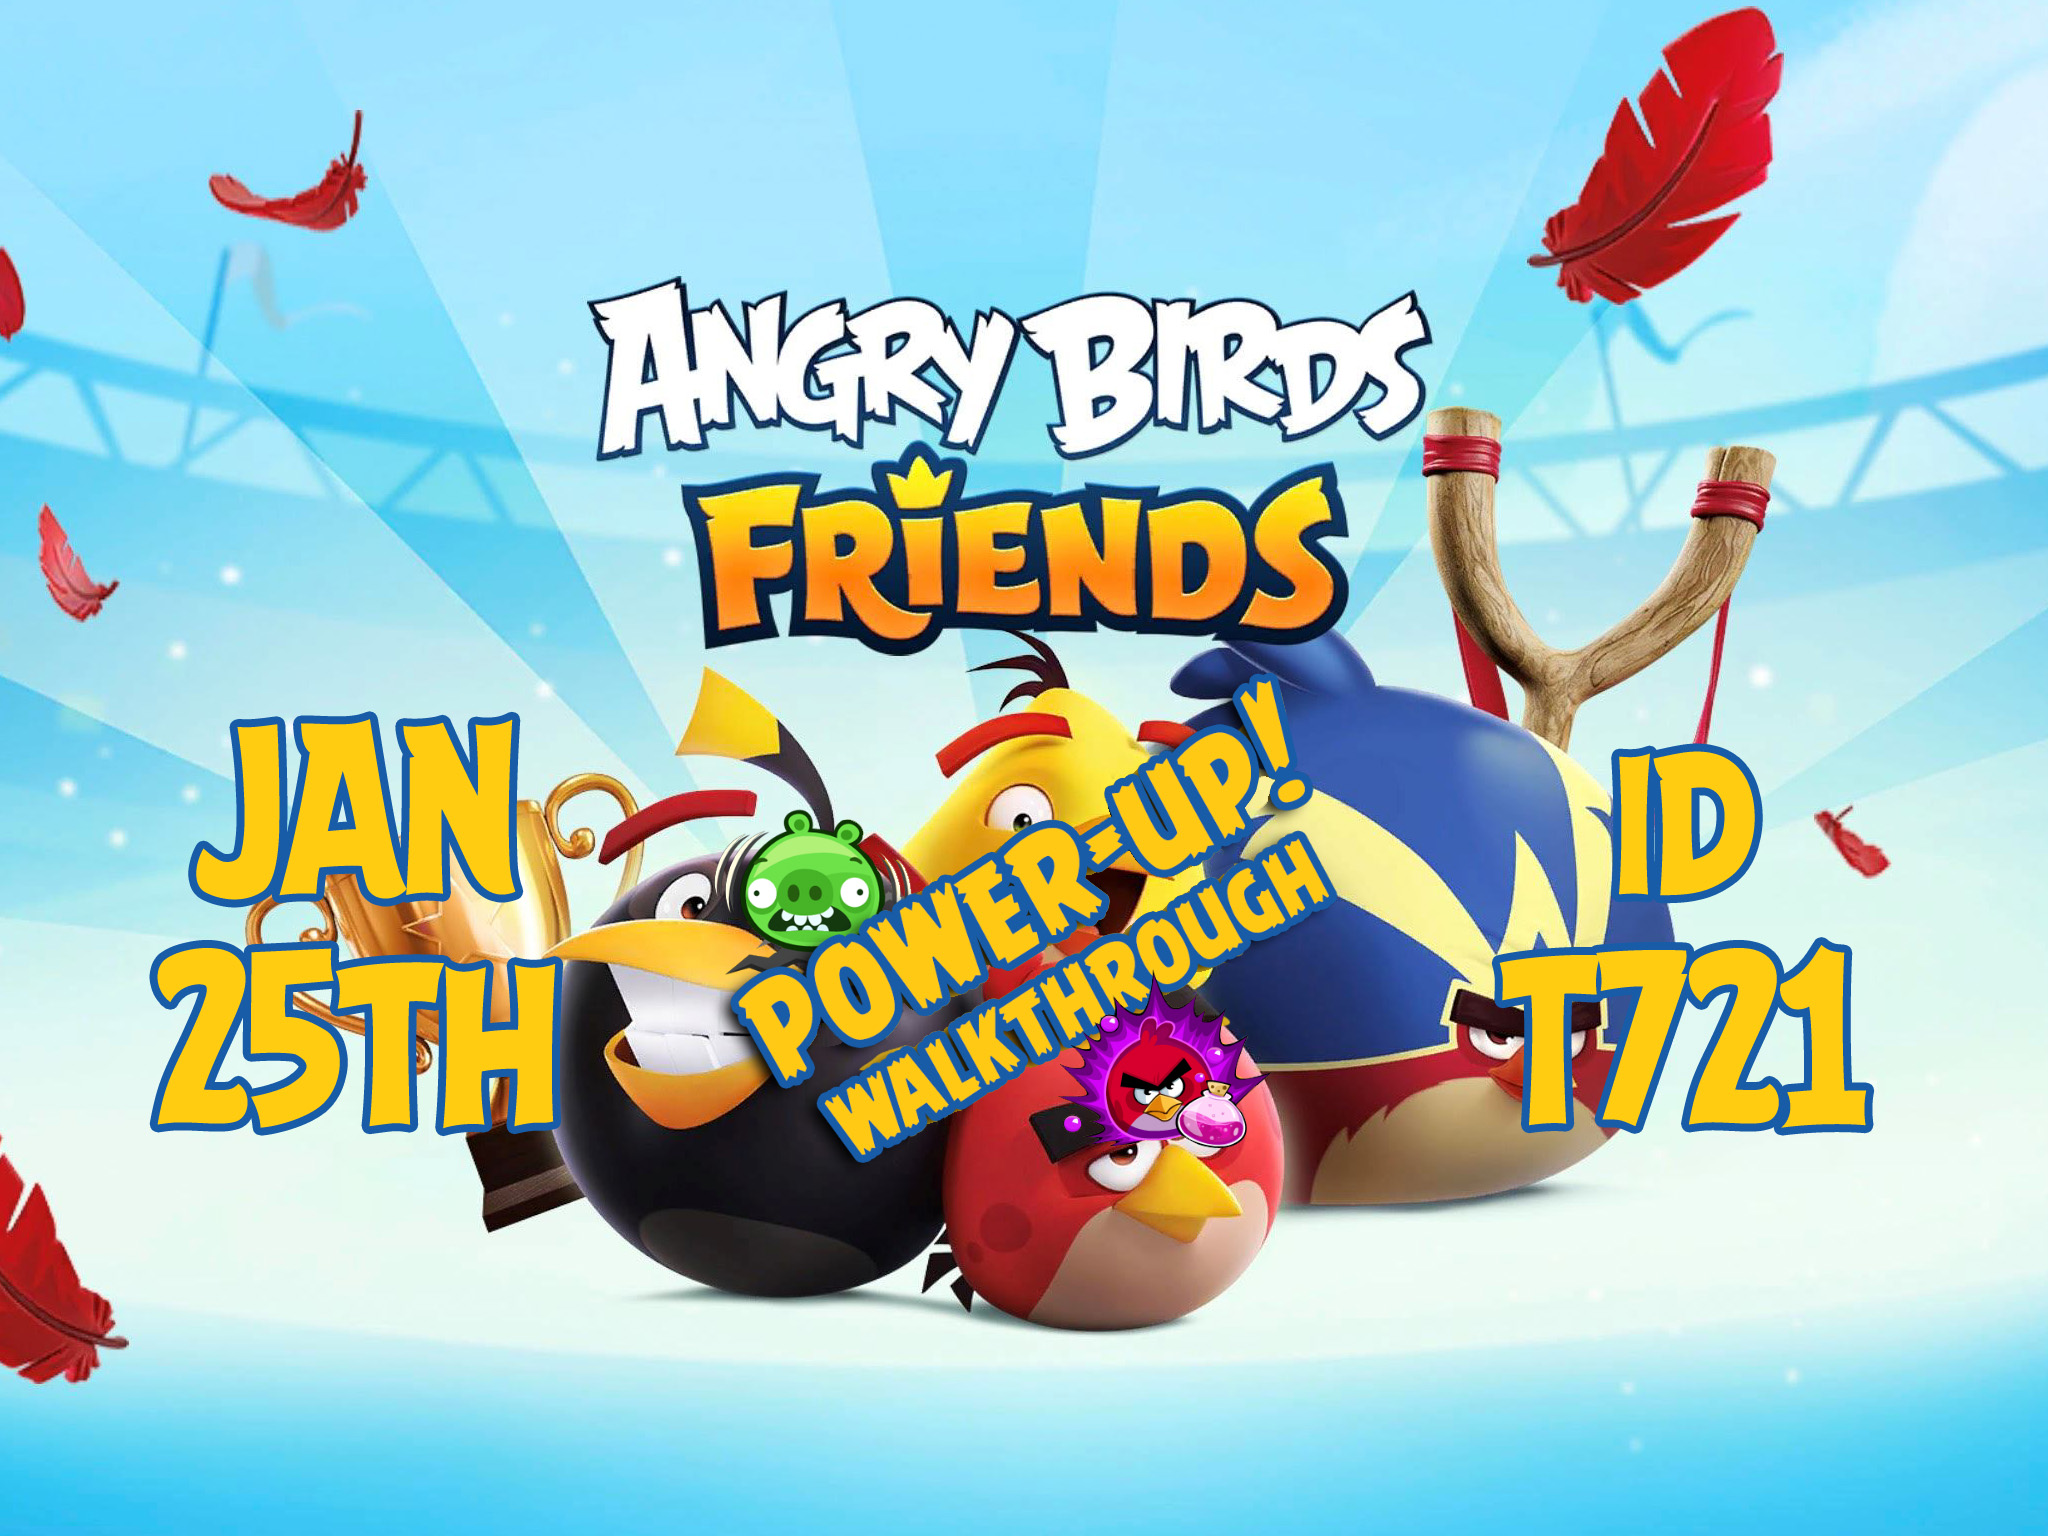 Angry-Birds-Friends-Tournament-T721-Feature-Image-PU